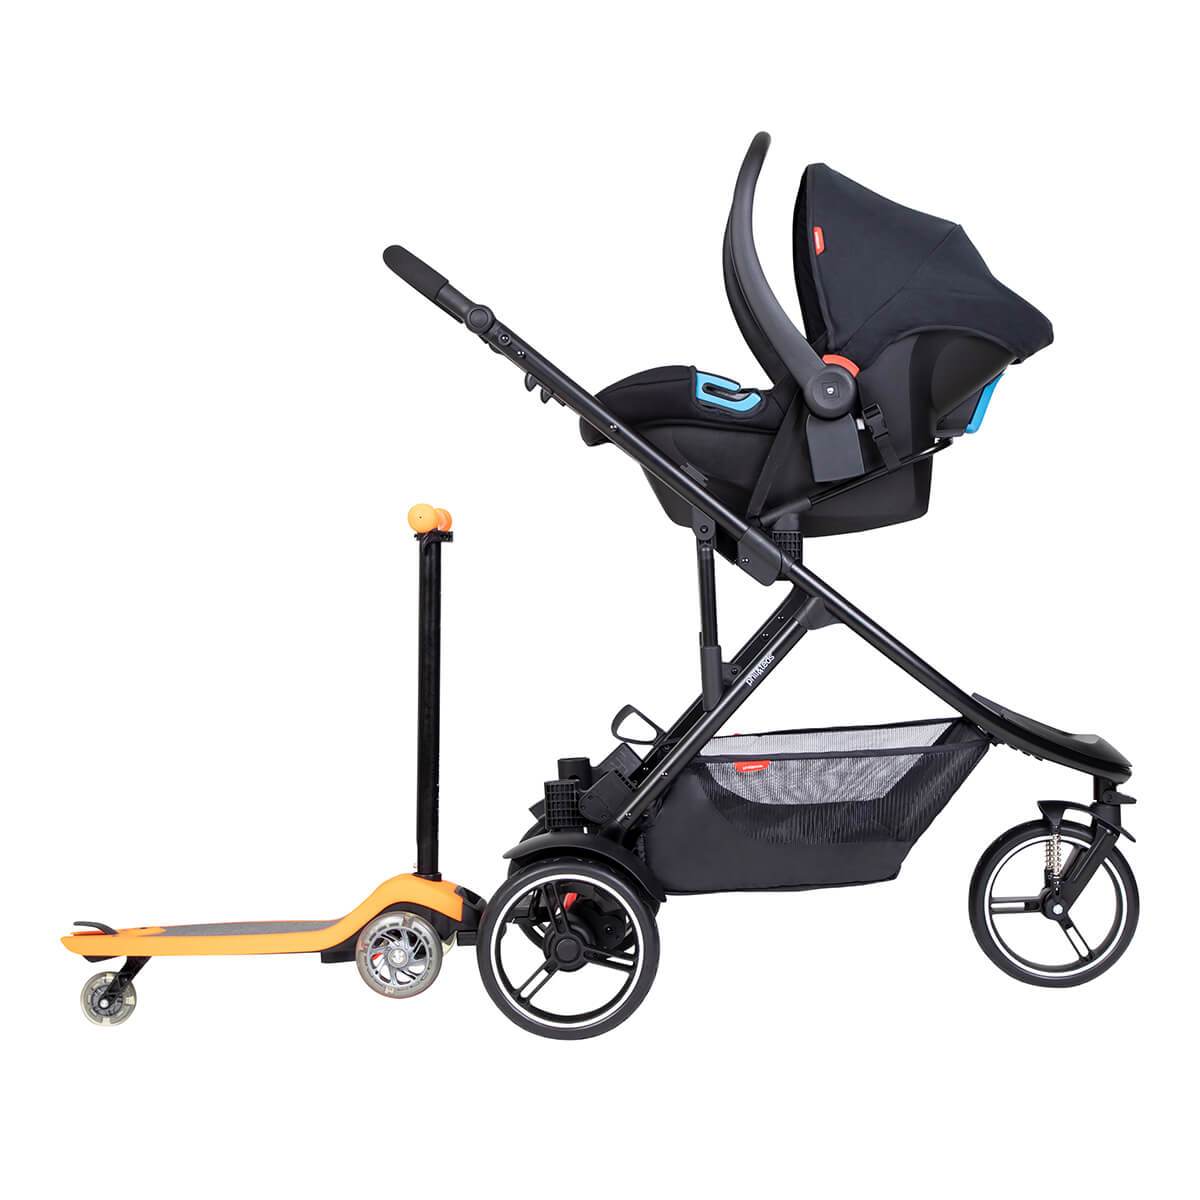 dot pram with carseat travel system attached - philandteds dot pram and car seat